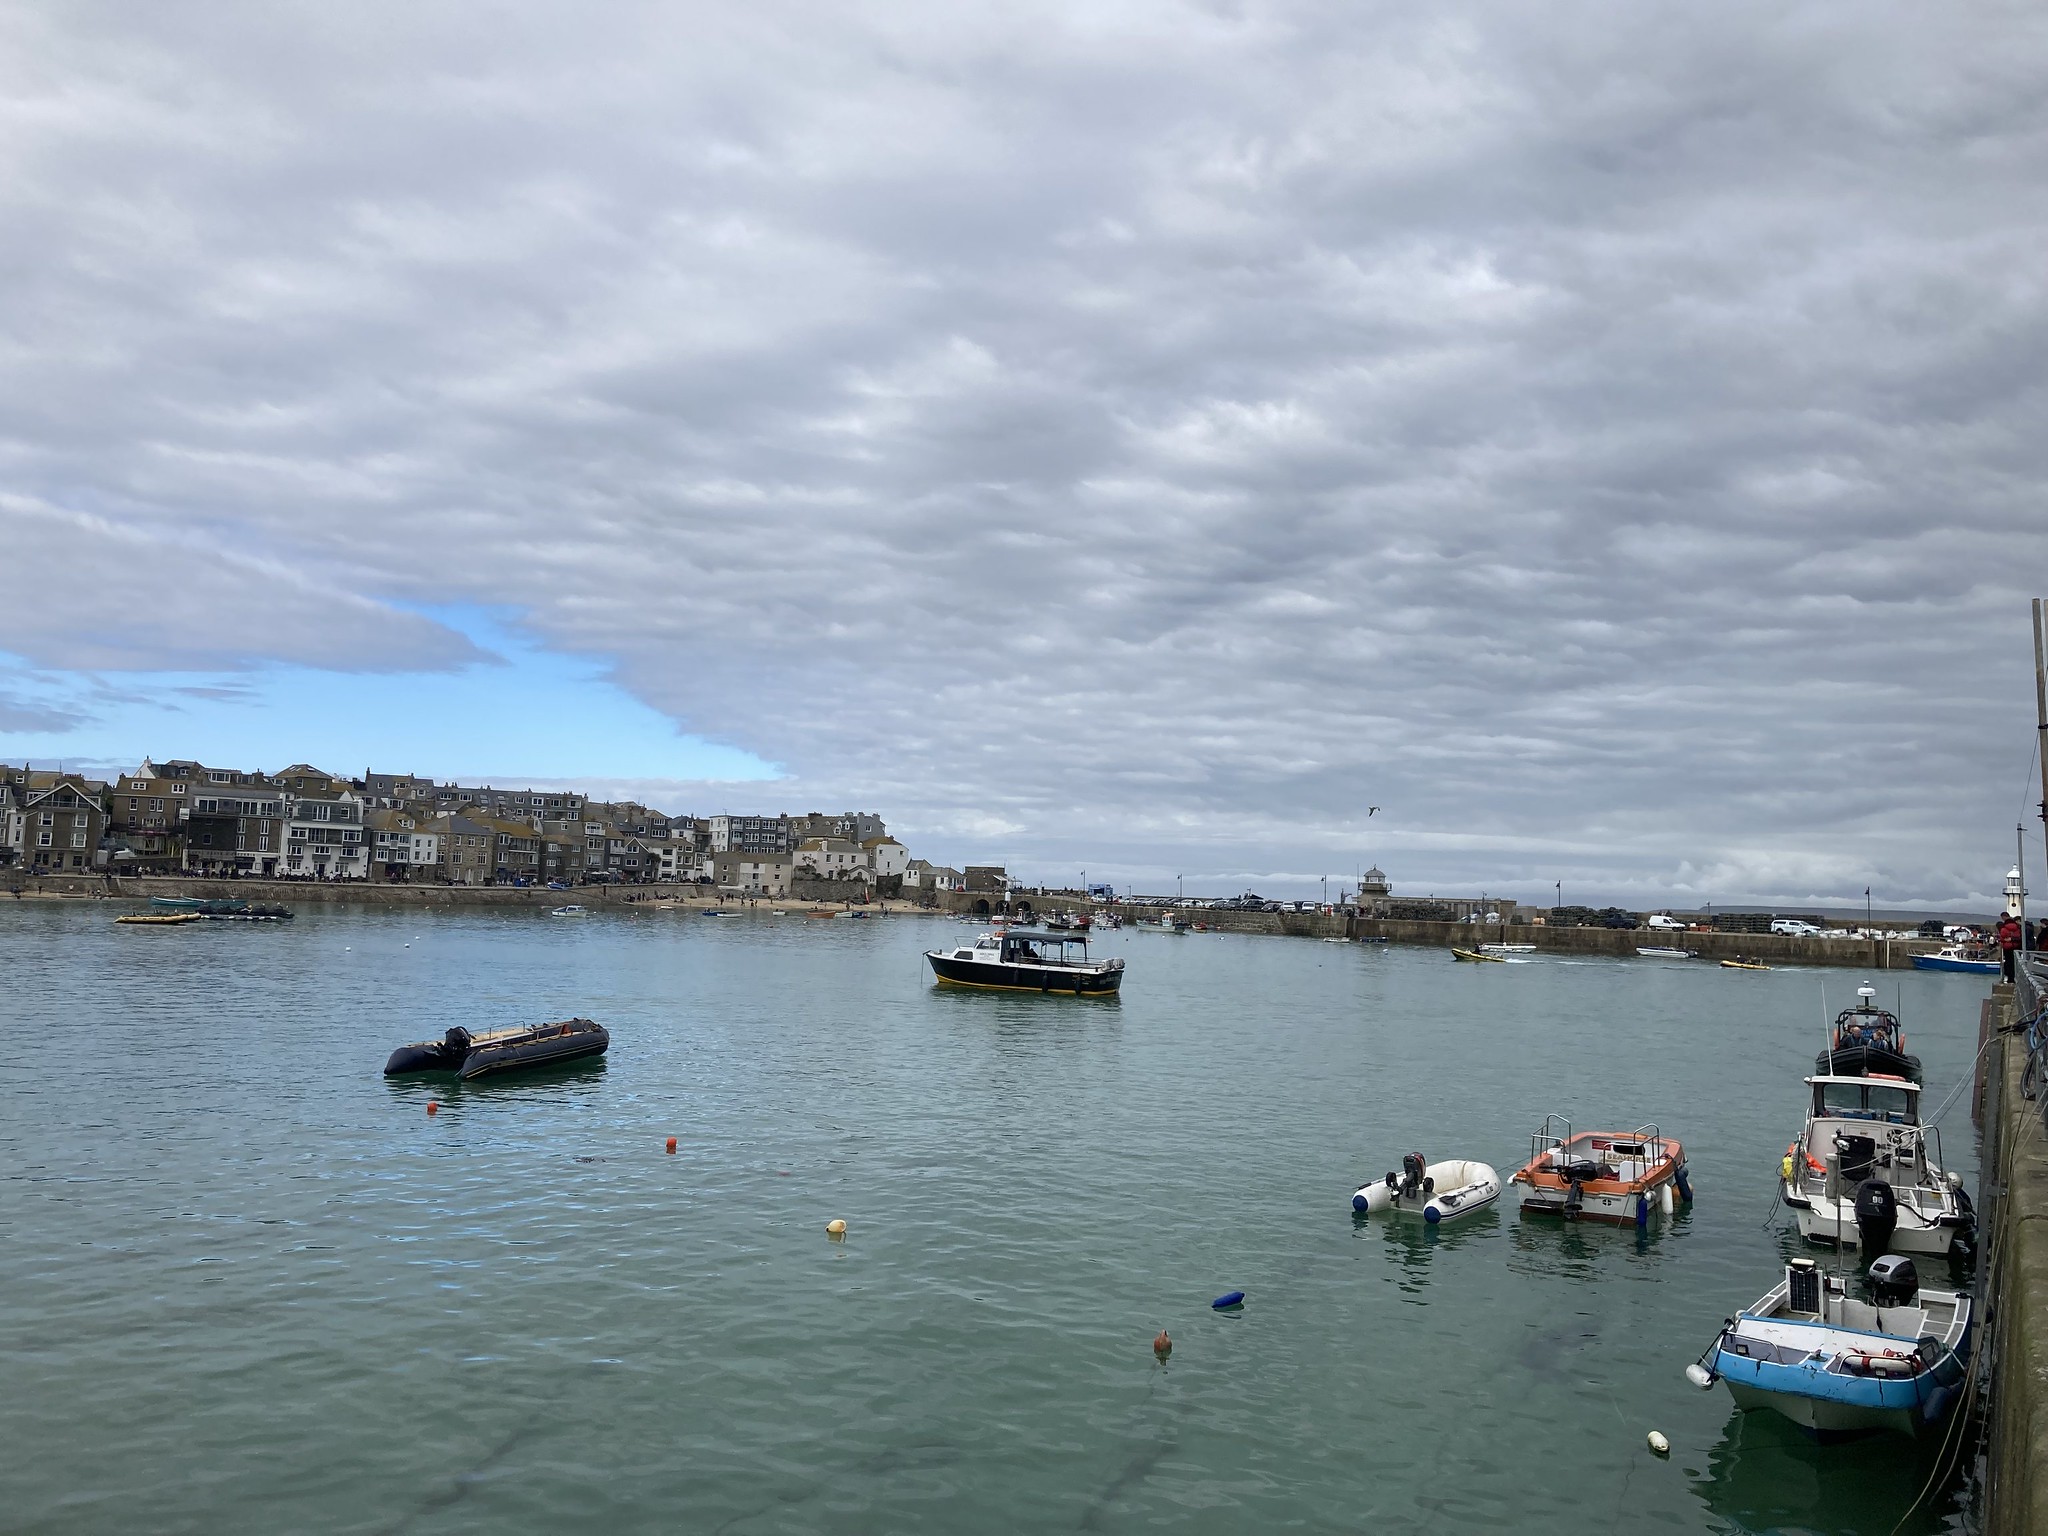 Travel bites: a family holiday in Cornwall